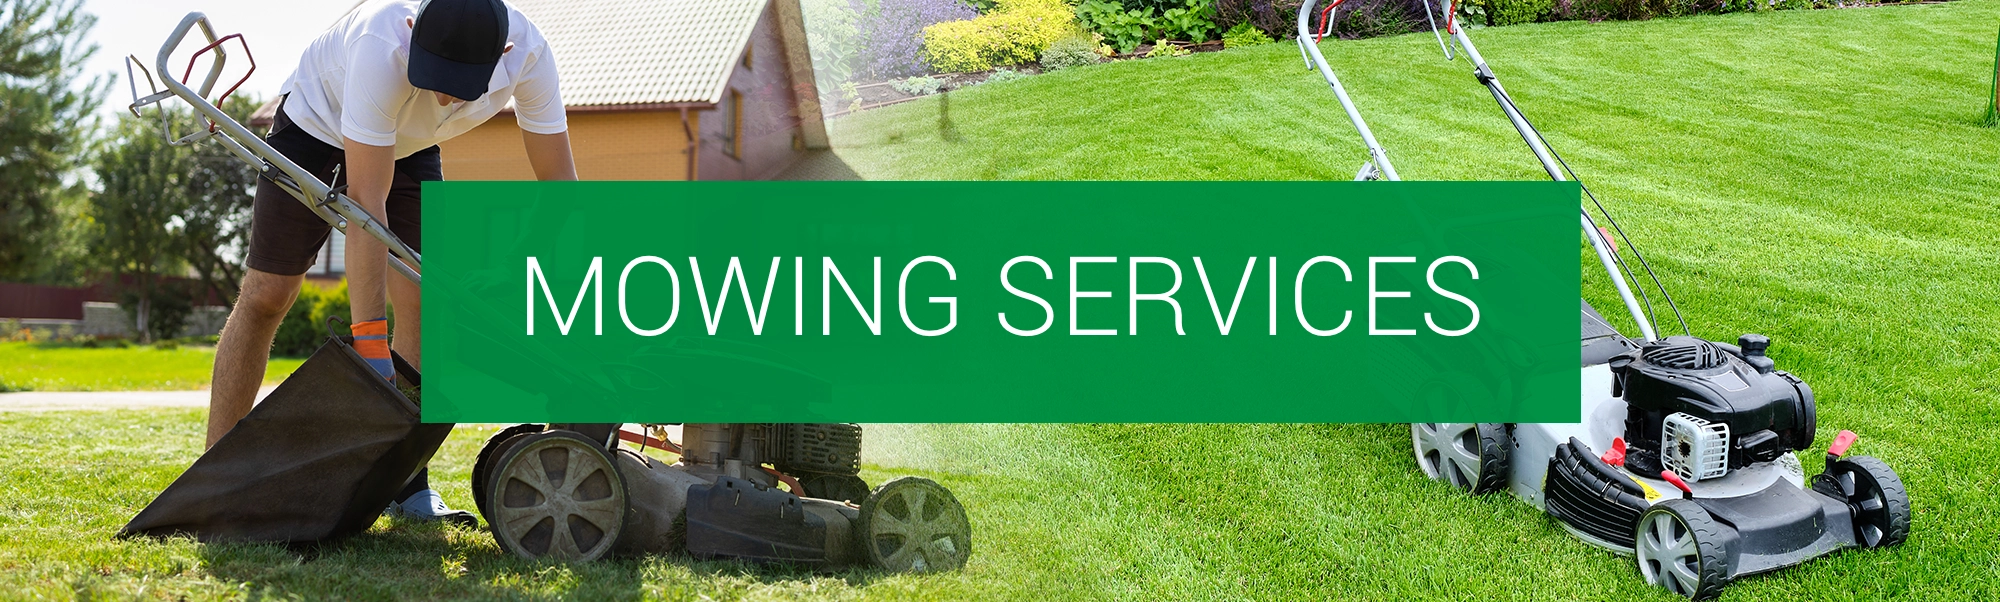 Lawn Care Services in Illinois - Mowing